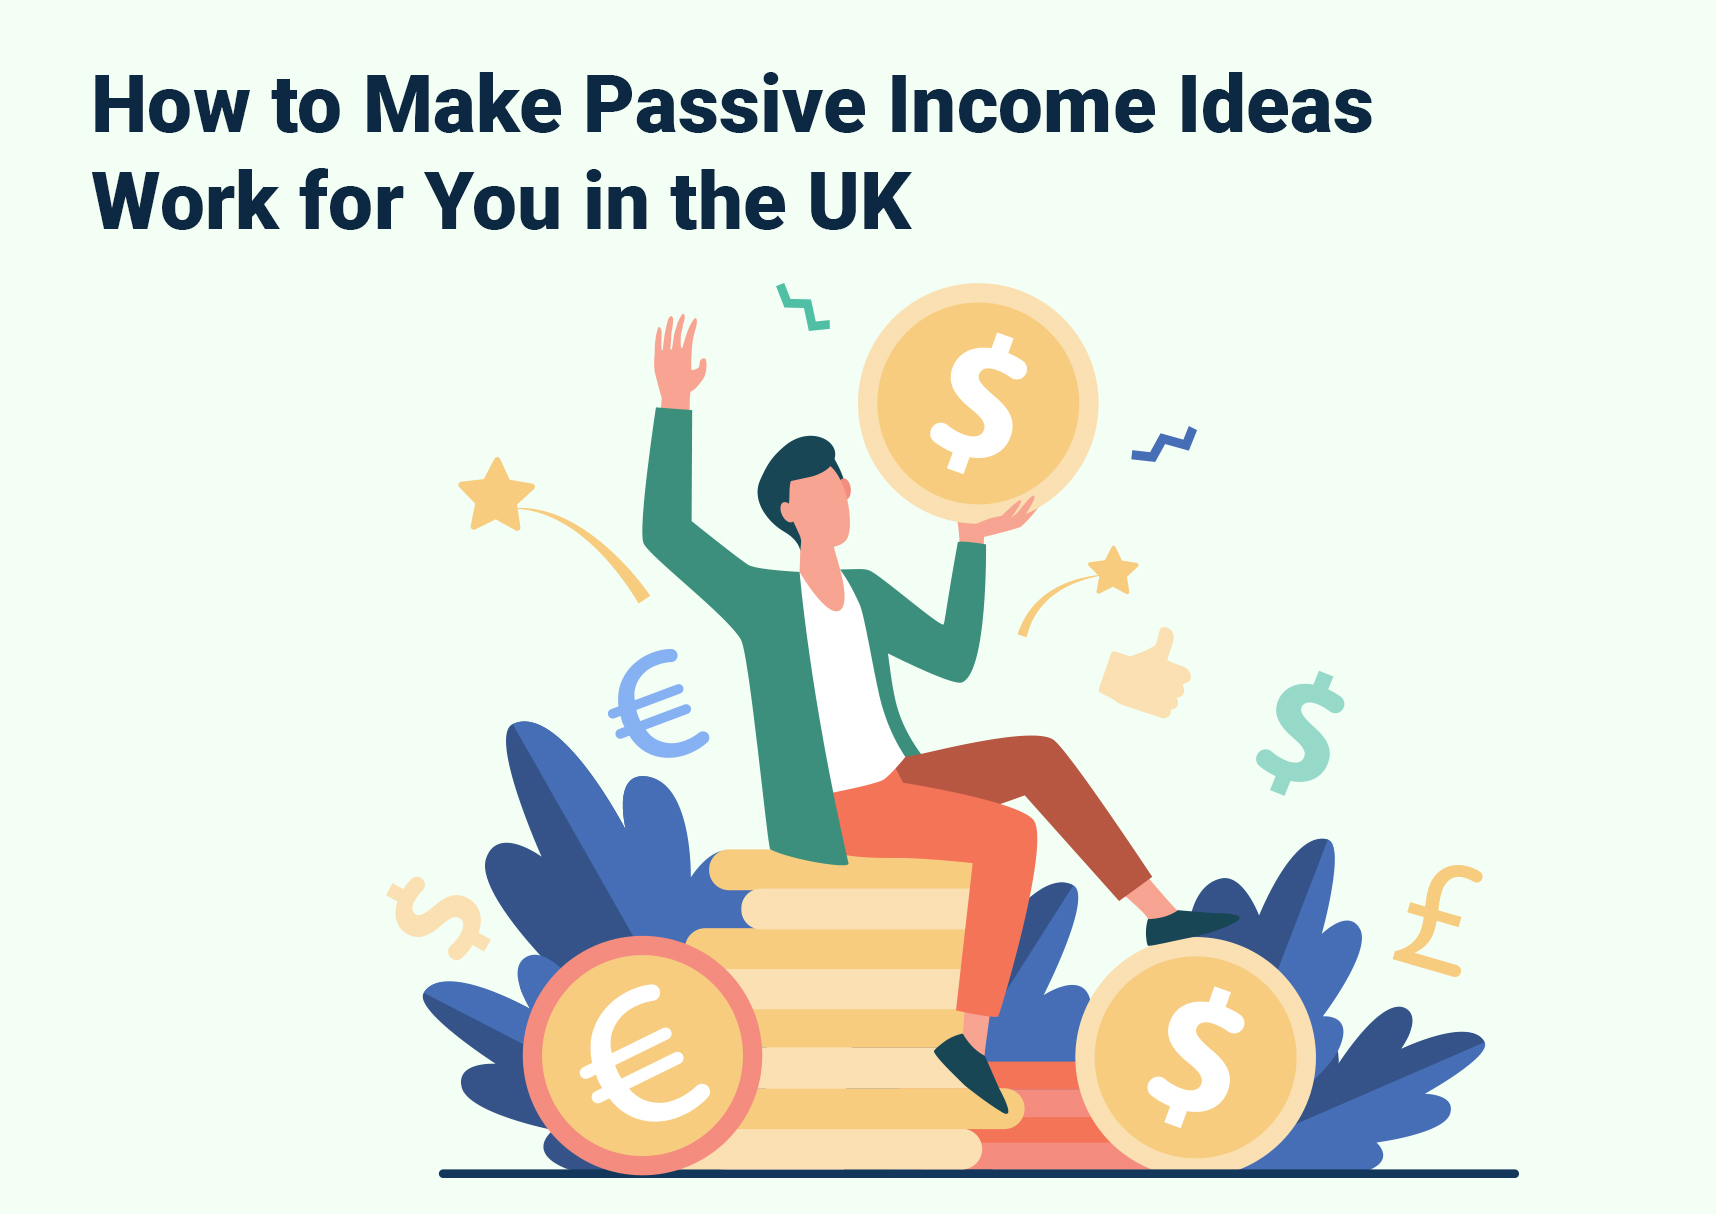 How to Make Passive Income Ideas Work for You in the UK